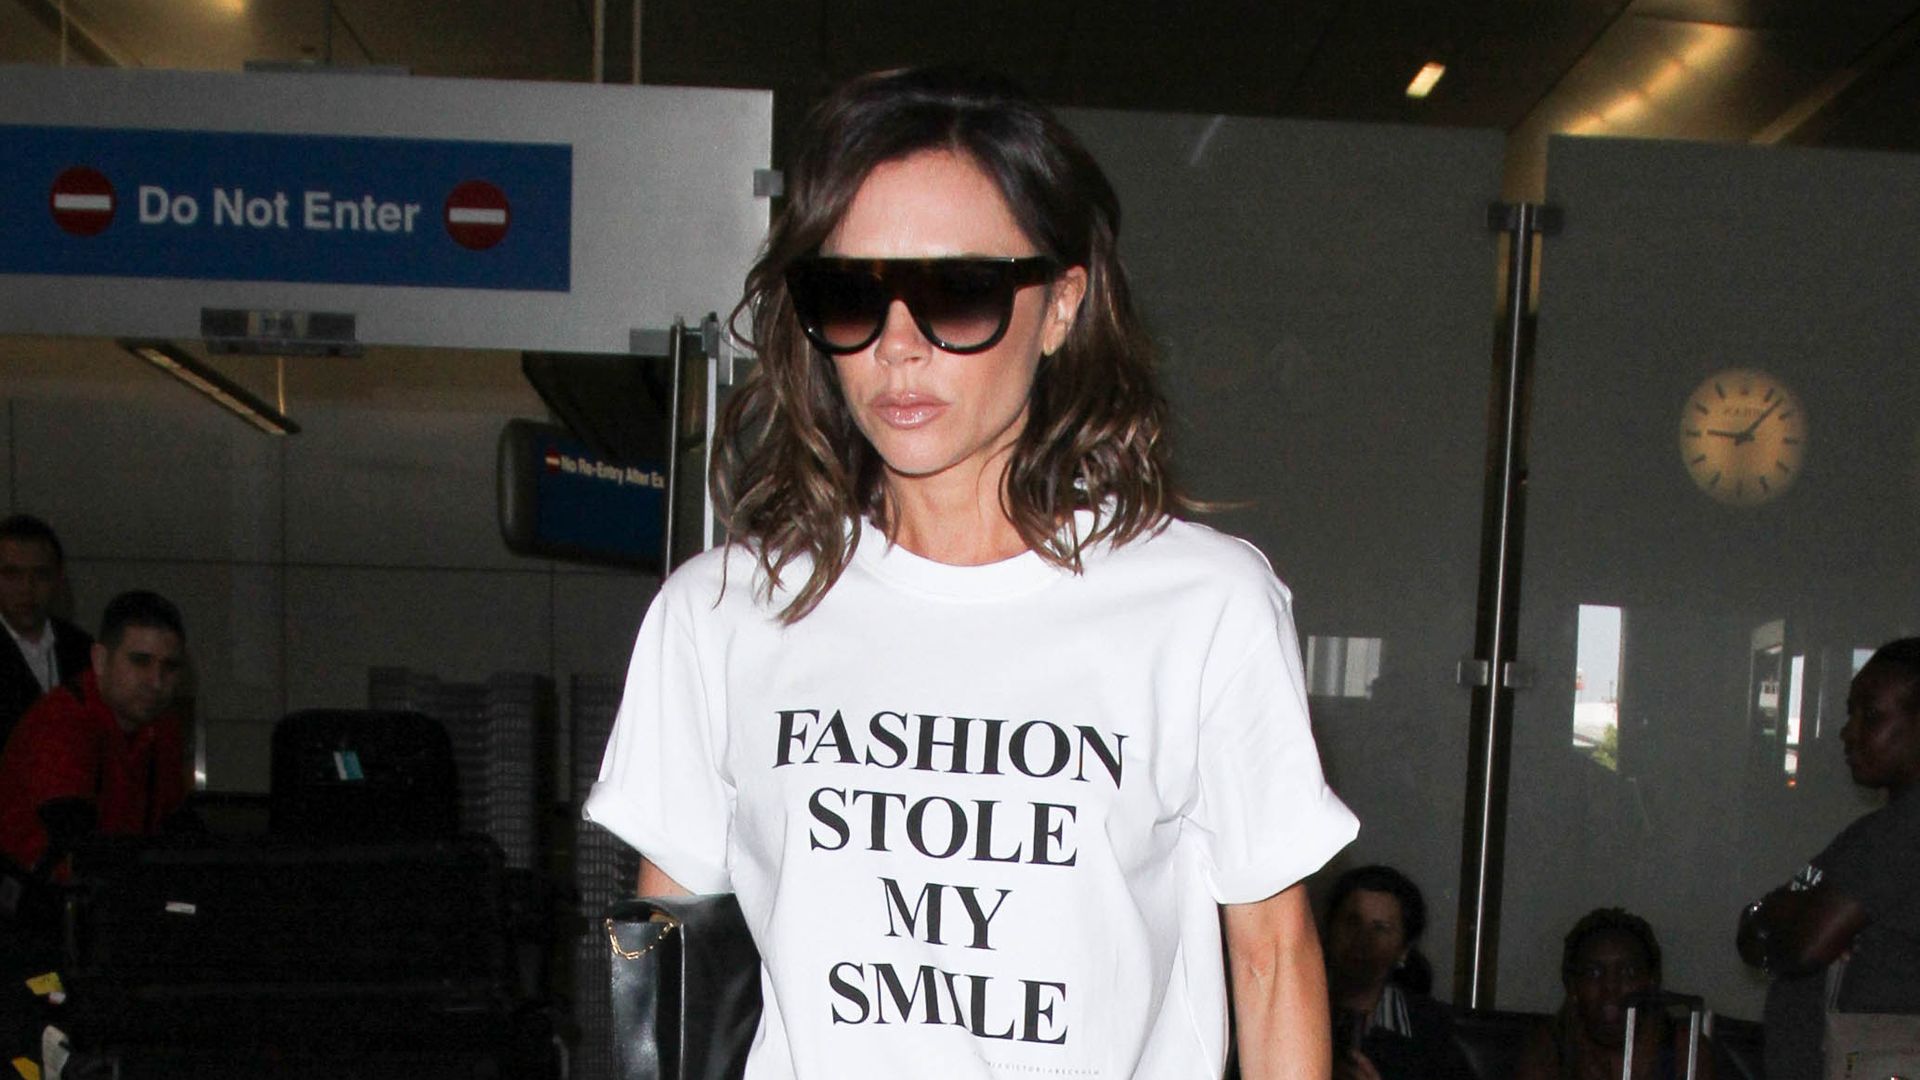 LOS ANGELES, CA - MARCH 28: Victoria Beckham is seen at LAX on March 28, 2017 in Los Angeles, California.  (Photo by starzfly/Bauer-Griffin/GC Images)